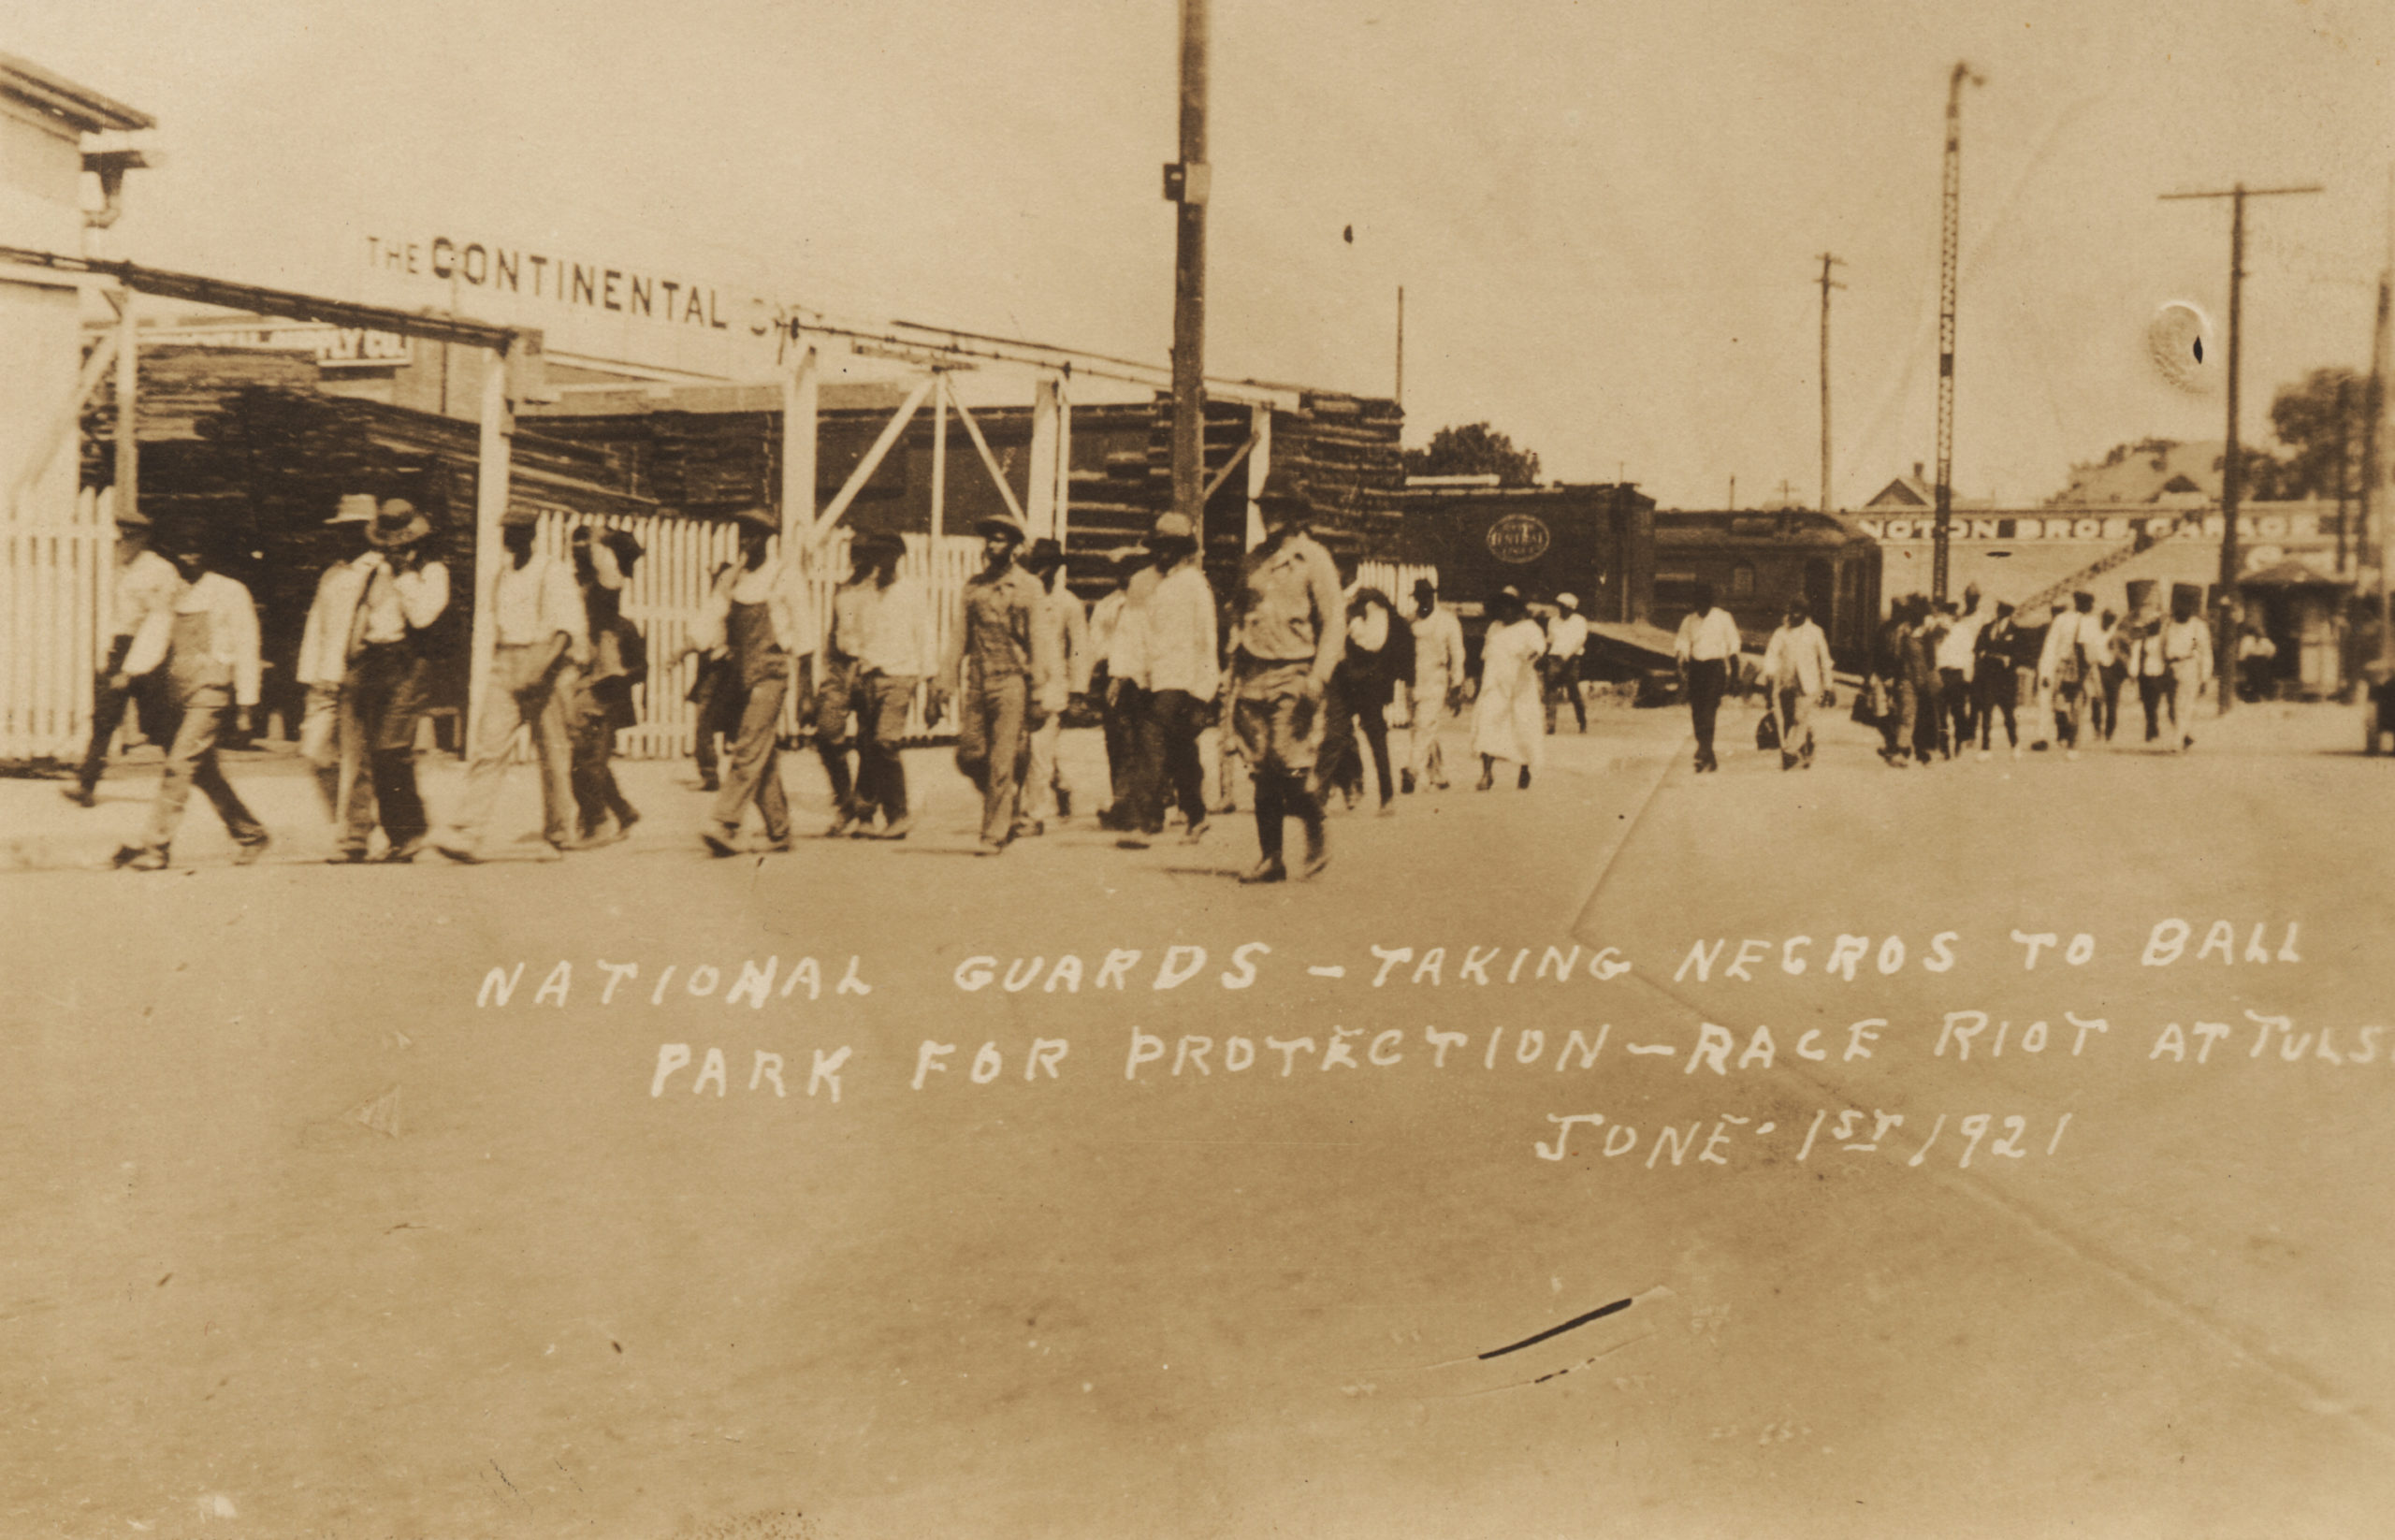 A postcard made from a photograph (1989.004.5.58). A large group of people are being escorted by several men in civilian attire with an automobile alongside. They have just crossed the tracks and are passing in front of the Continental Supply Co. (offices at 19 S. Main). There is an issue with this image since while the Continental Supply Co. on the south side of the tracks, the address is on the east side of the street. The structures in the rest of the image are also not consistant with this being that part of Main St. Title is taken from the writing on the face of the postcard.